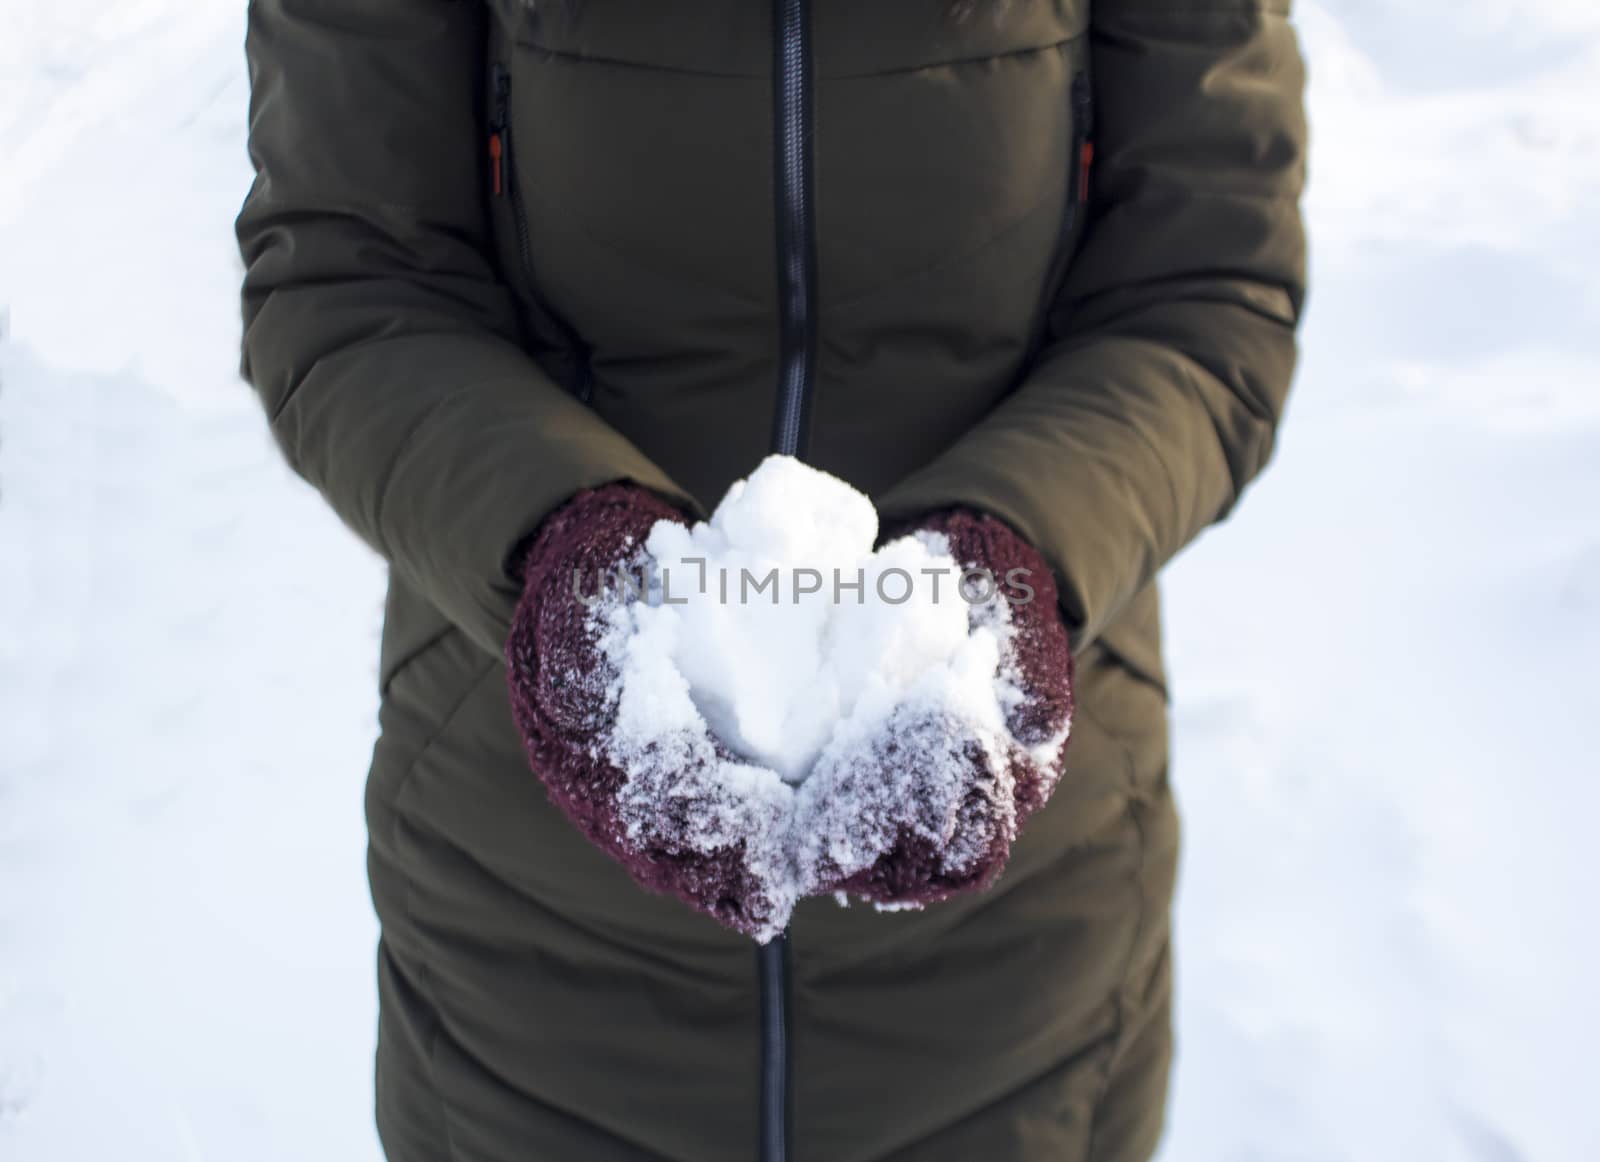 One person holds a snowball in winter in the Park, walk, fun, sports and leisure, green jacket, Burgundy mittens